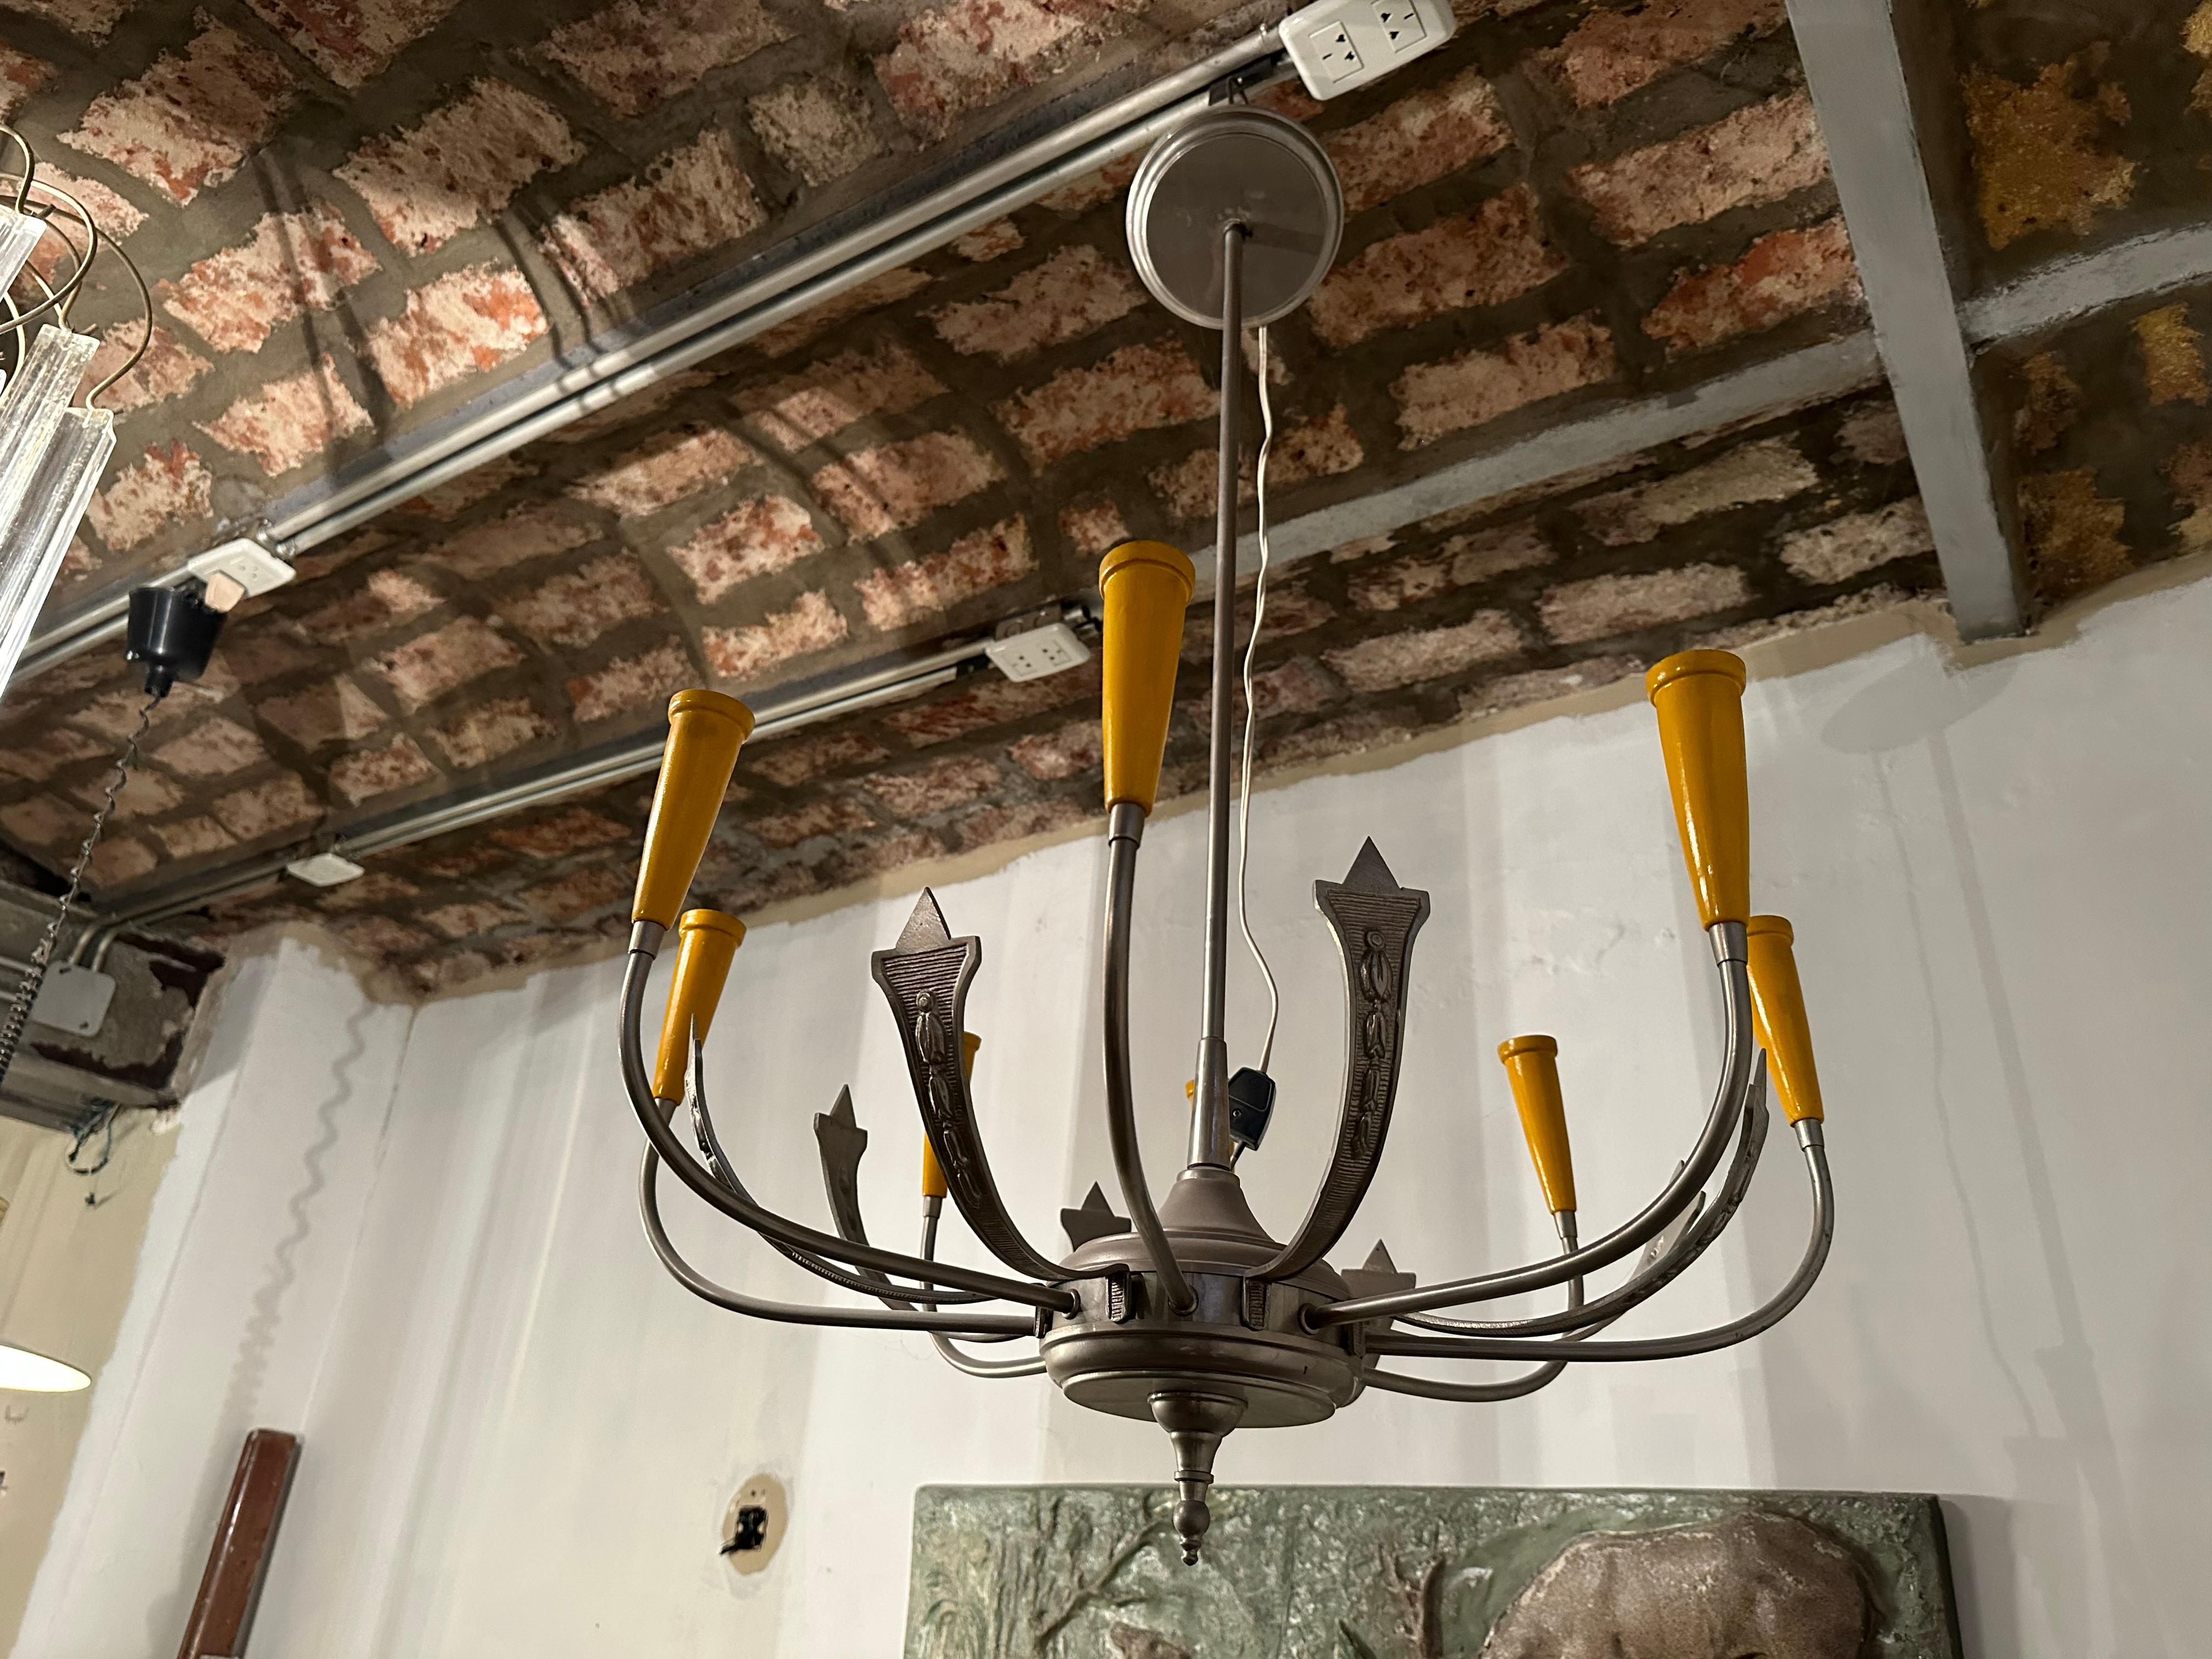 Hanging lamp.
To take care of your property and the lives of our customers, the new wiring has been done.
We have specialized in the sale of Art Deco and Art Nouveau and Vintage styles since 1982. If you have any questions we are at your